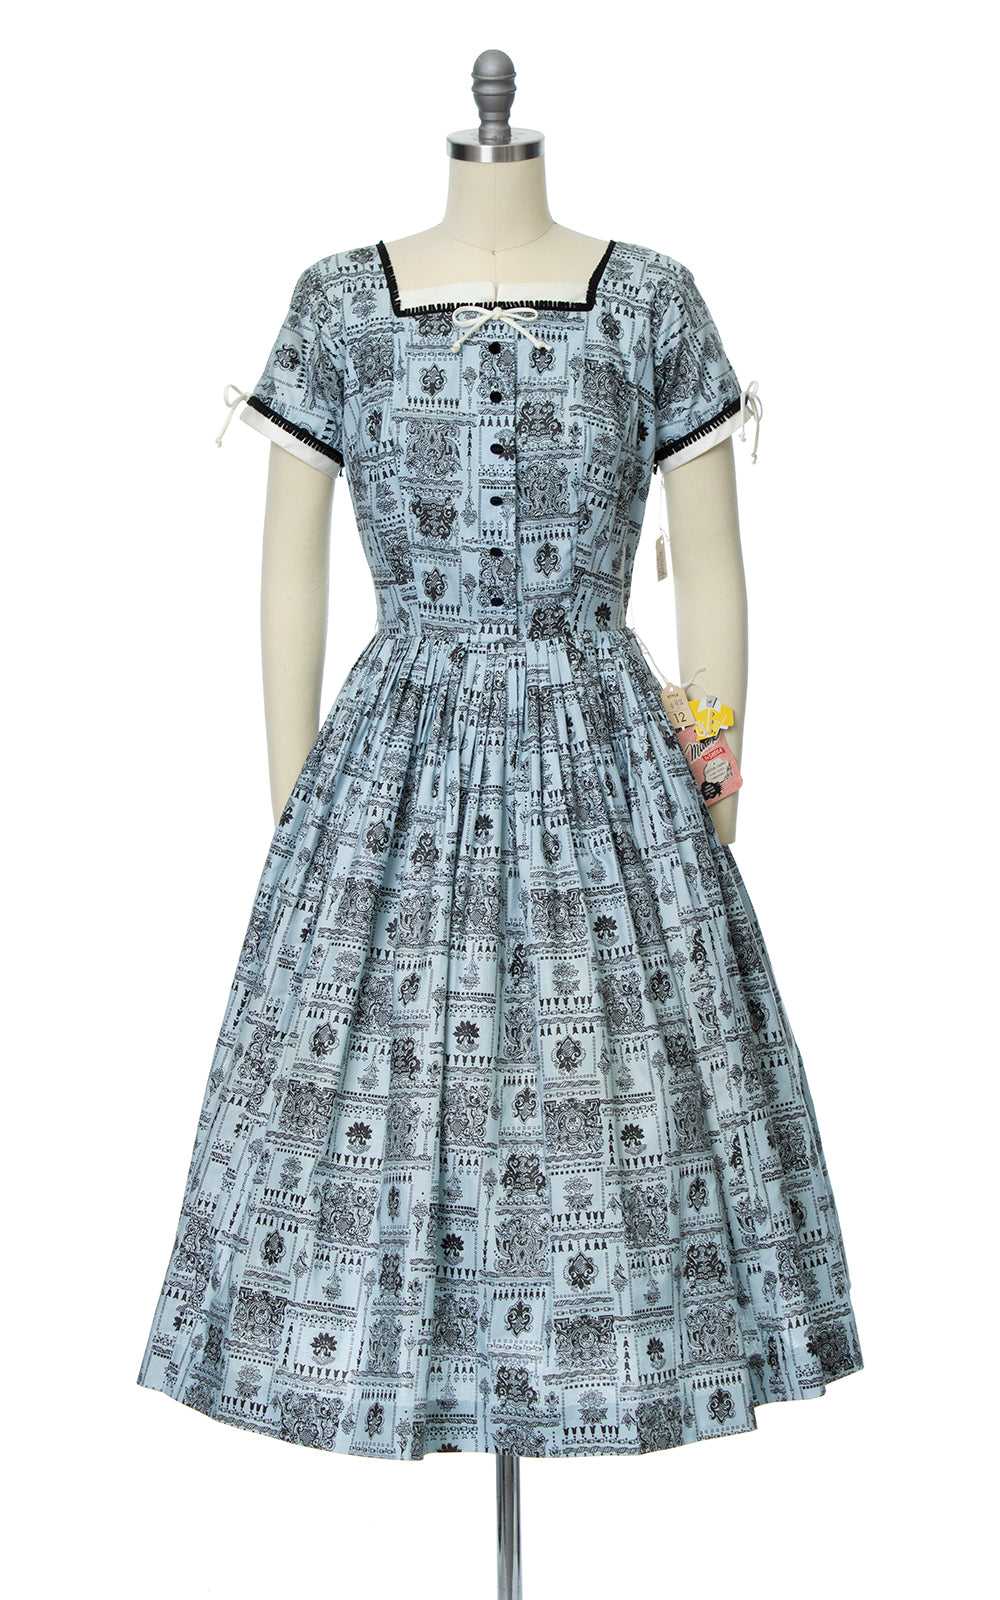 DEADSTOCK 1950s Printed Cotton Dress | small - image 1